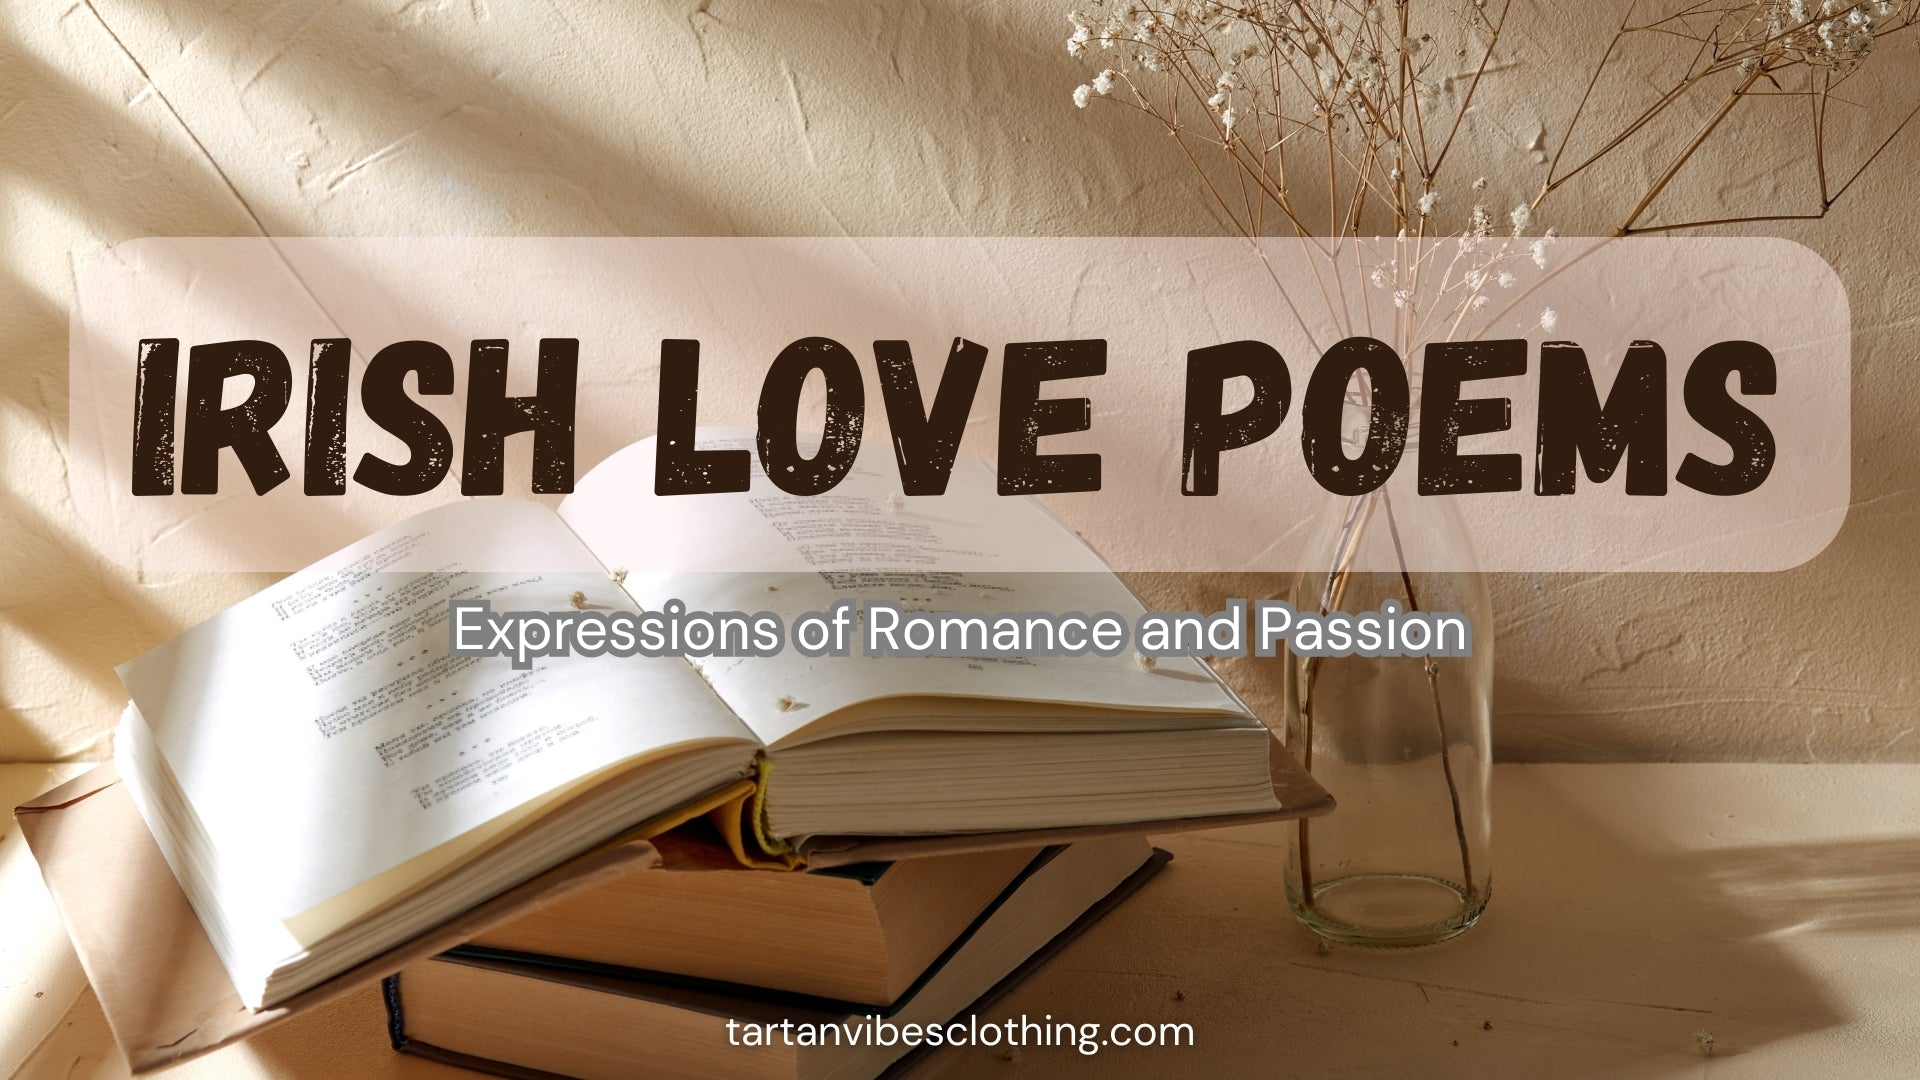 Irish Love Poems: Expressions of Romance and Passion